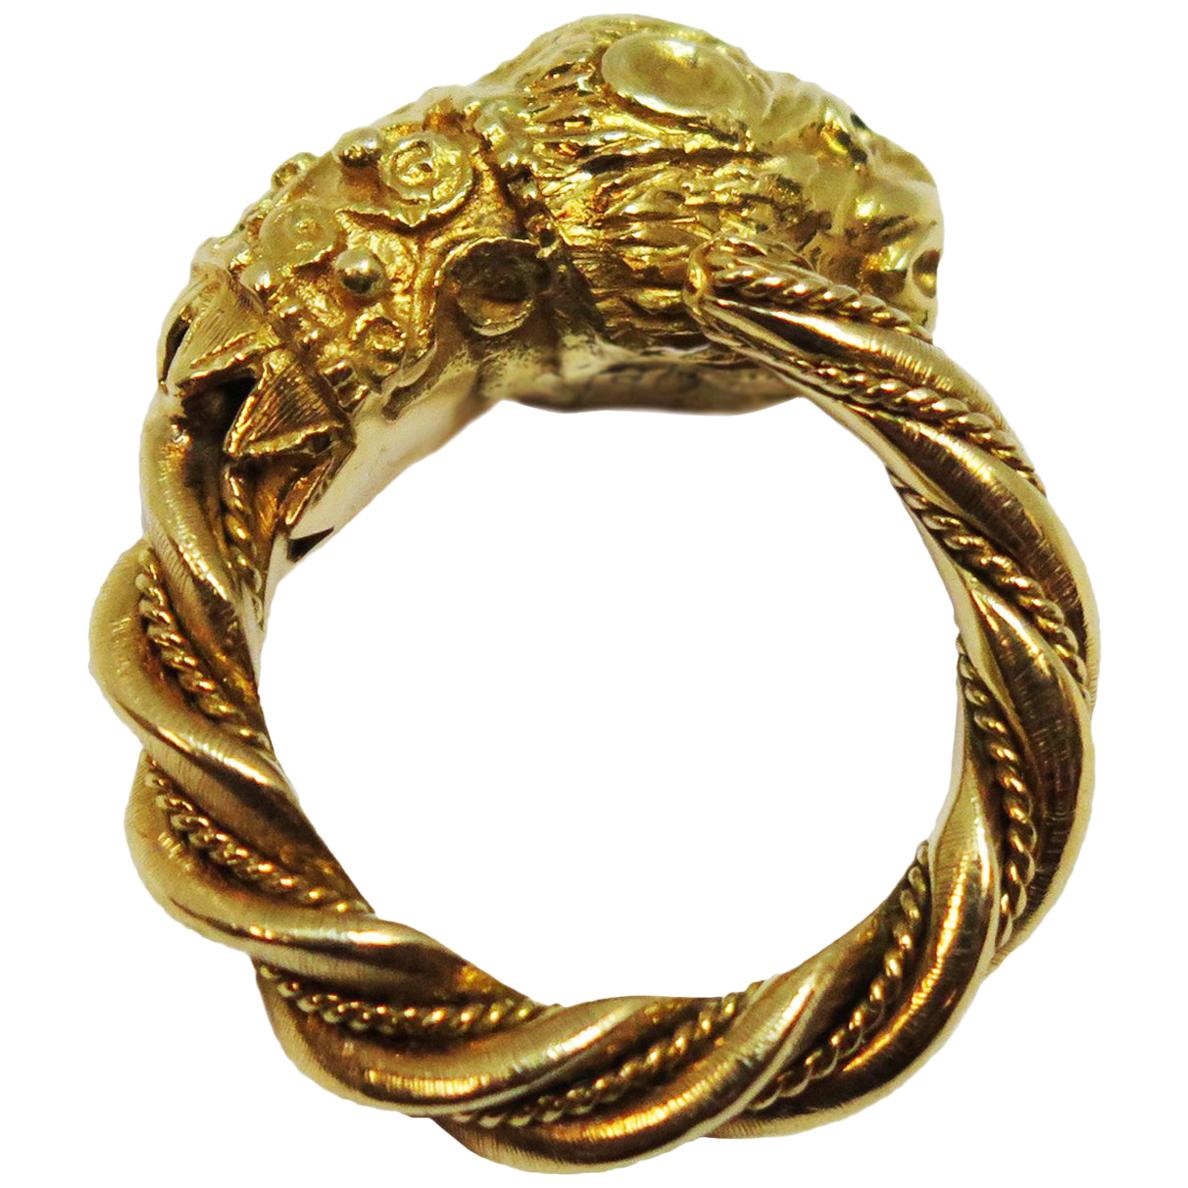 Circa 1980s Zolotas Greece Chimera Head 18k Yellow Gold Ring, hand made with traditional Ancient geek Roman design, 4.5 MM thick shank with the top measuring 7/8 inch across. Set with Ruby Eyes. 